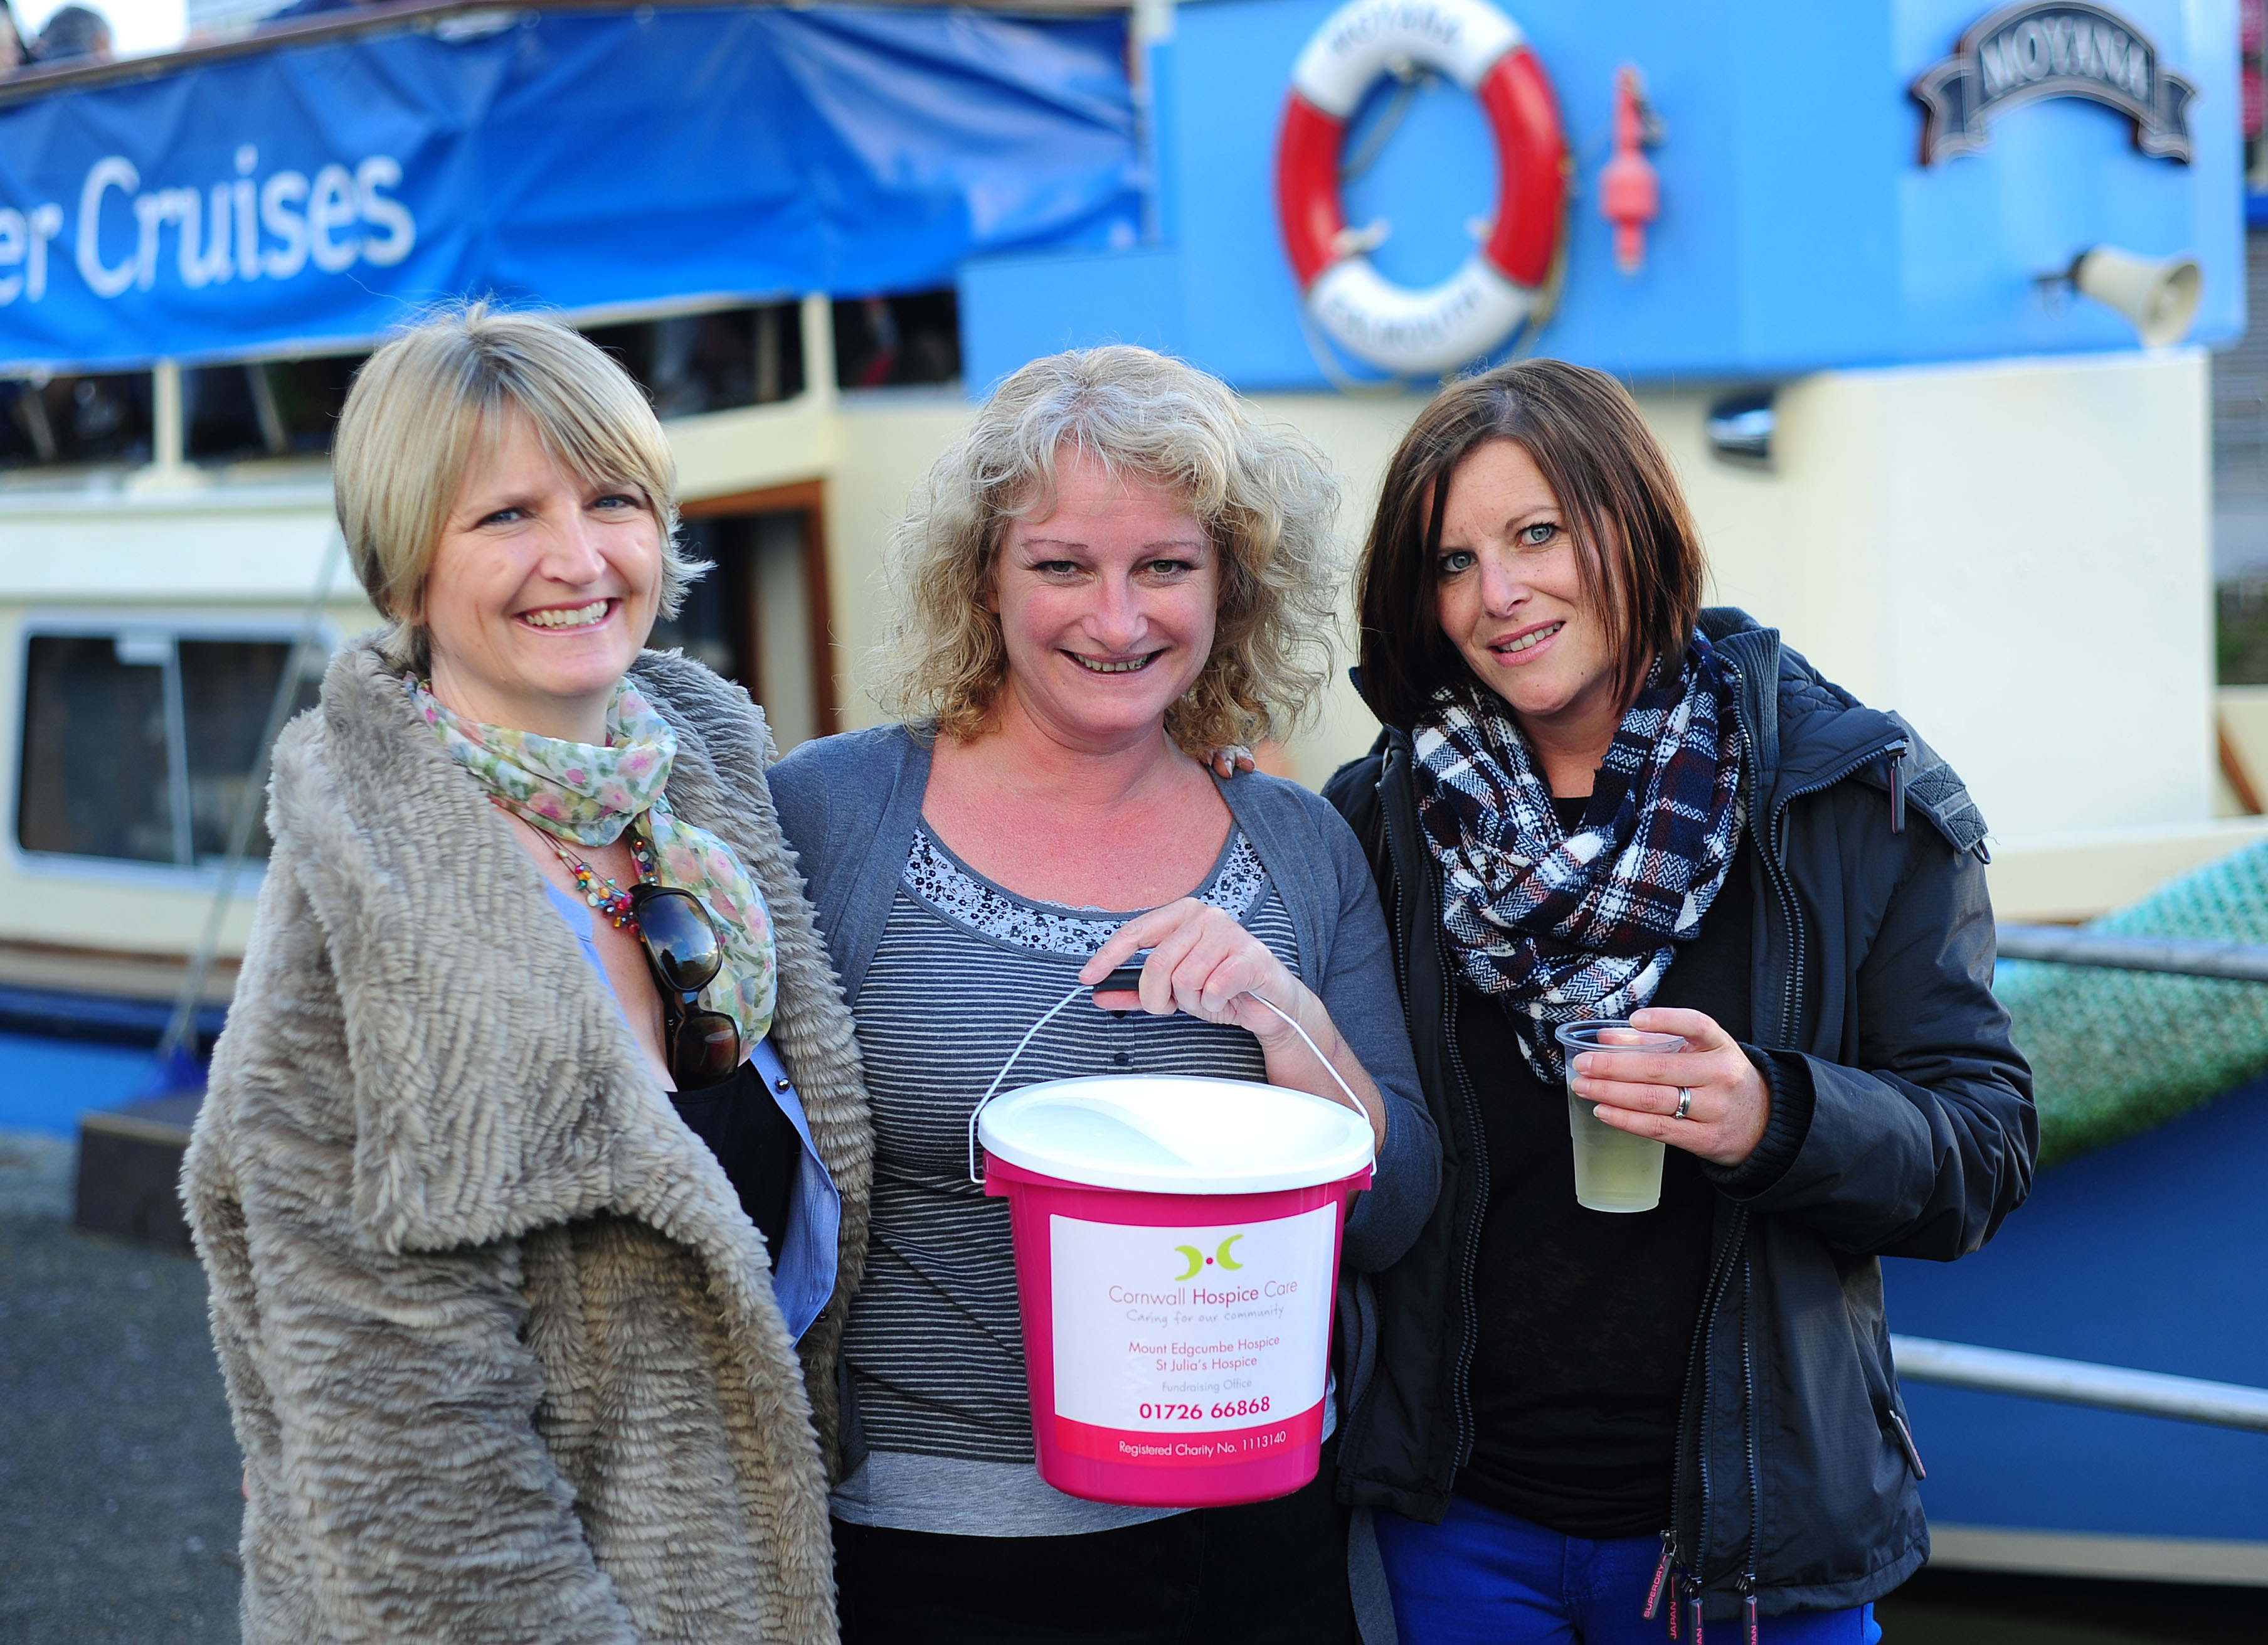 The Women of Worldwide (l-r): Donna Hansen, Lynne Williams and Rebecca Bendle. The independent financial advisers have raised over £5,000 for Cornwall Hospice Care in 2013